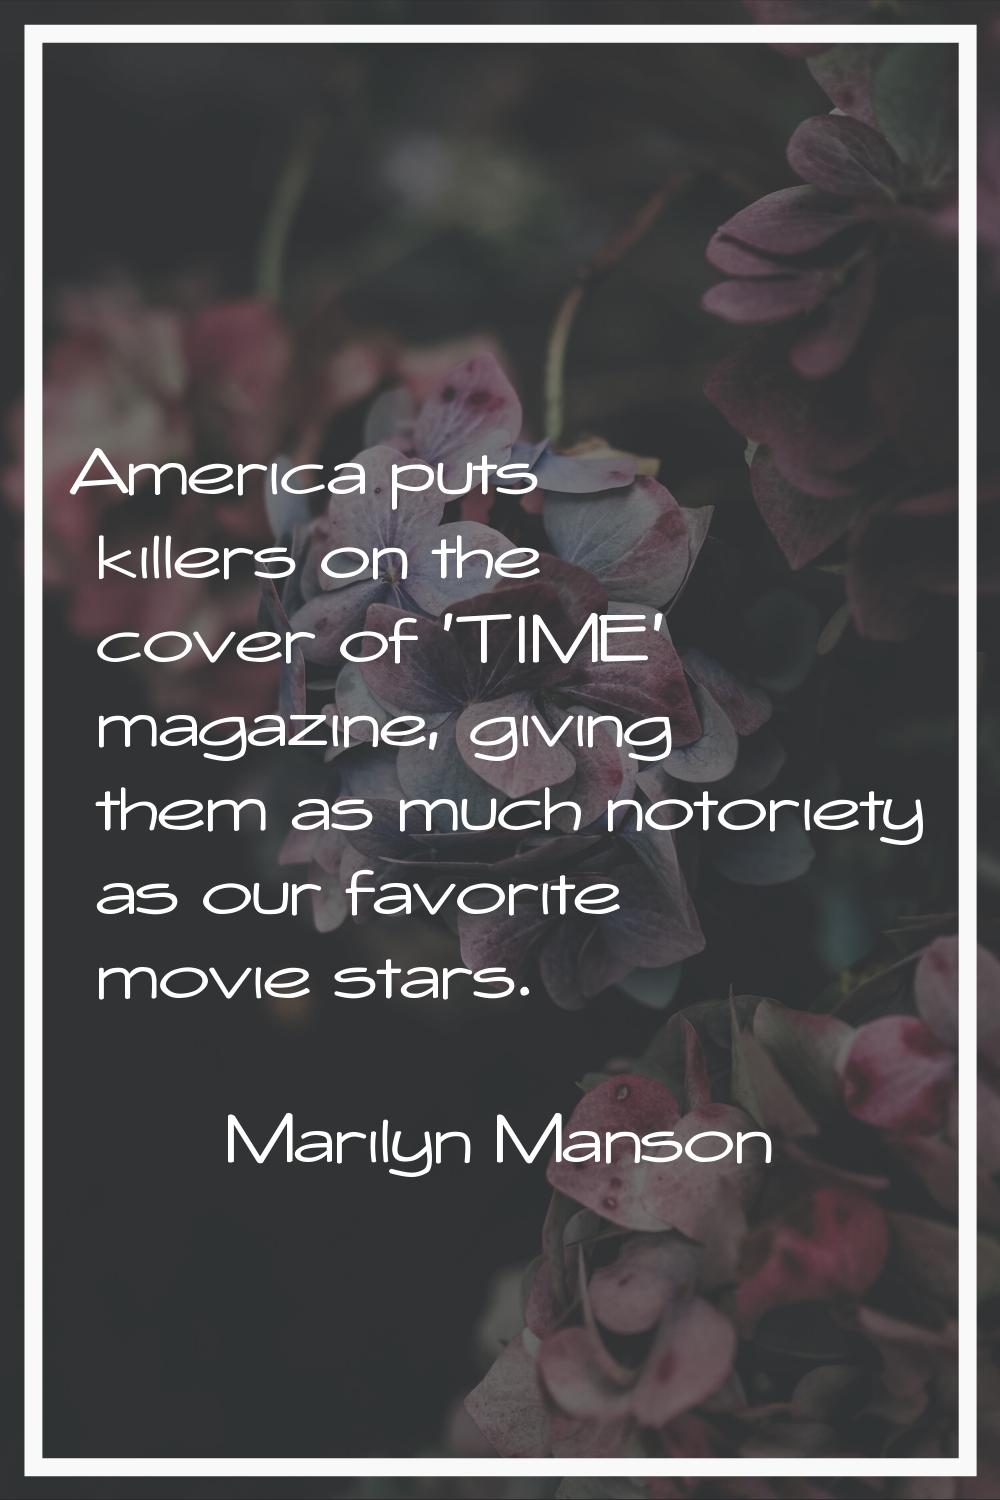 America puts killers on the cover of 'TIME' magazine, giving them as much notoriety as our favorite